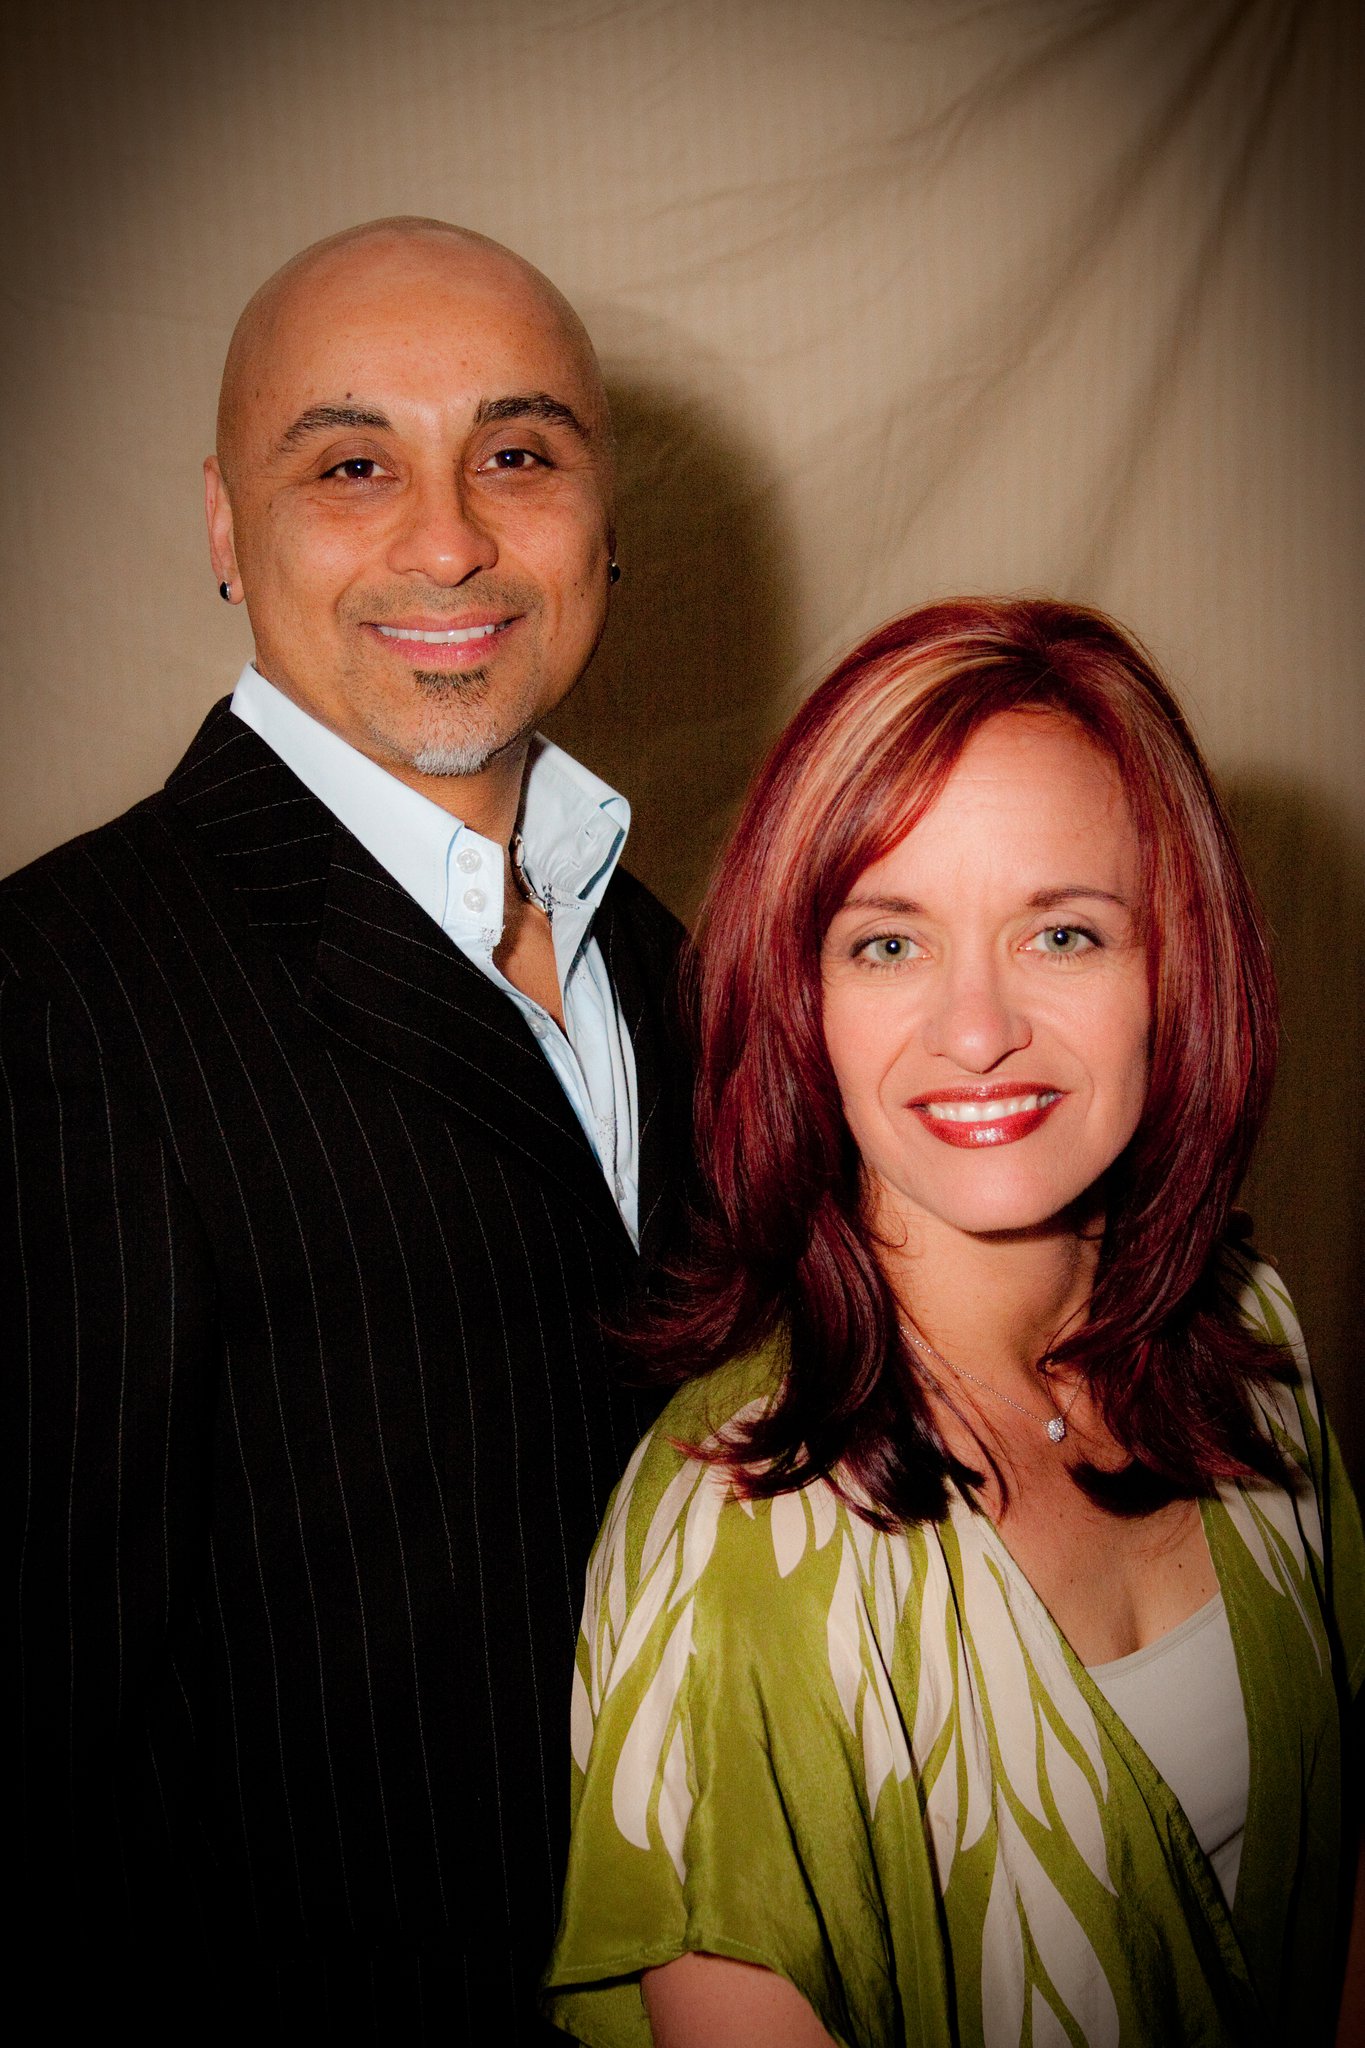 Our Founders Gina H. Tabrizy and Farid Tabrizy